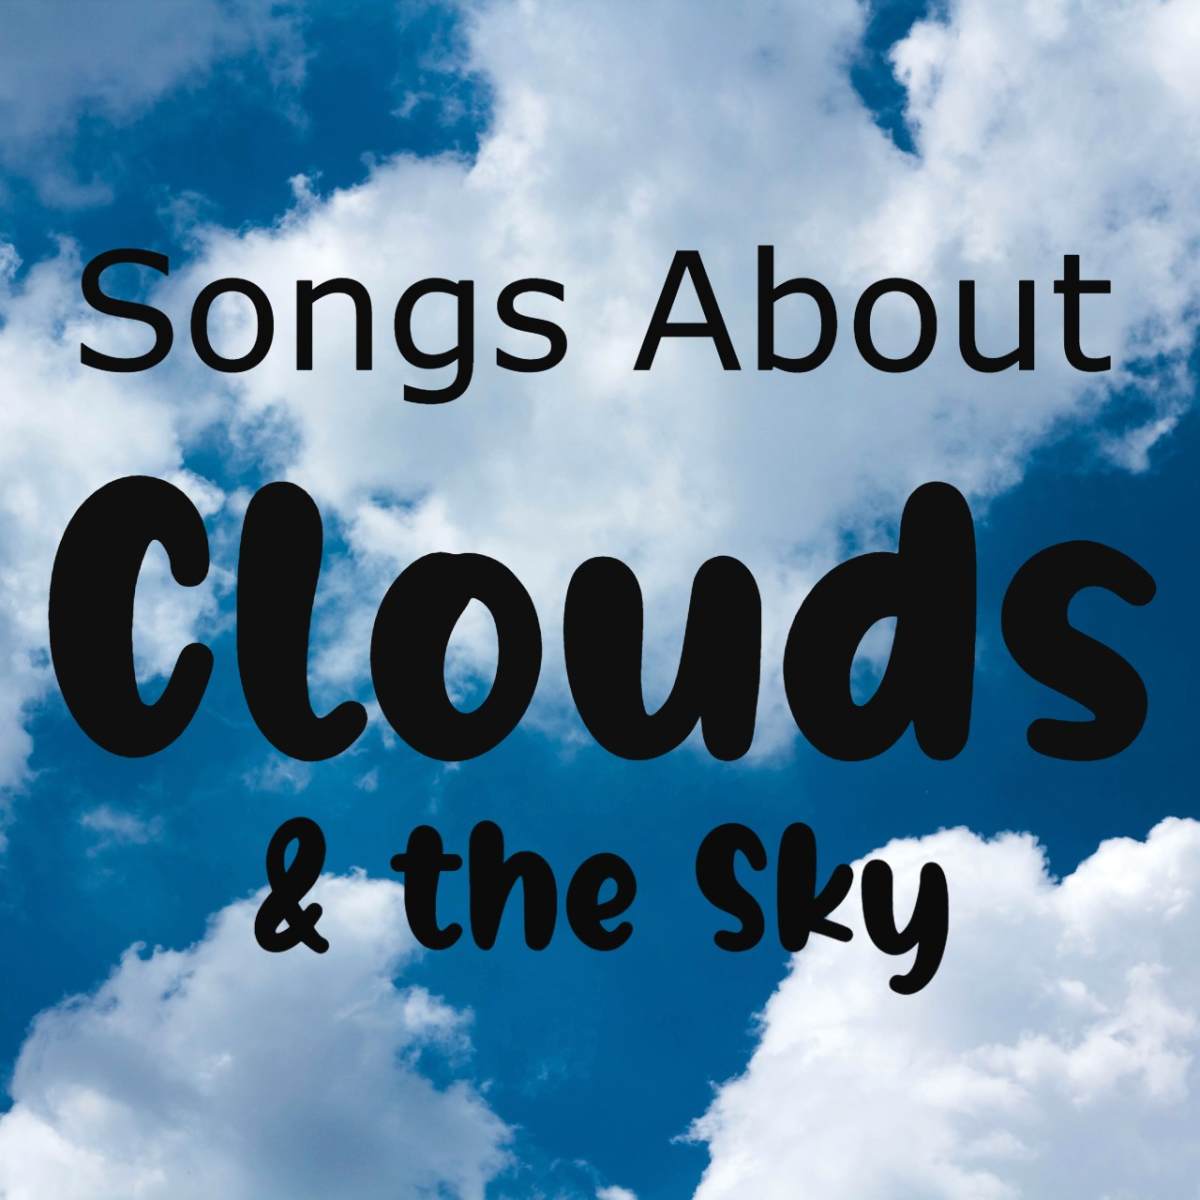 44 Songs About Clouds And The Sky Spinditty